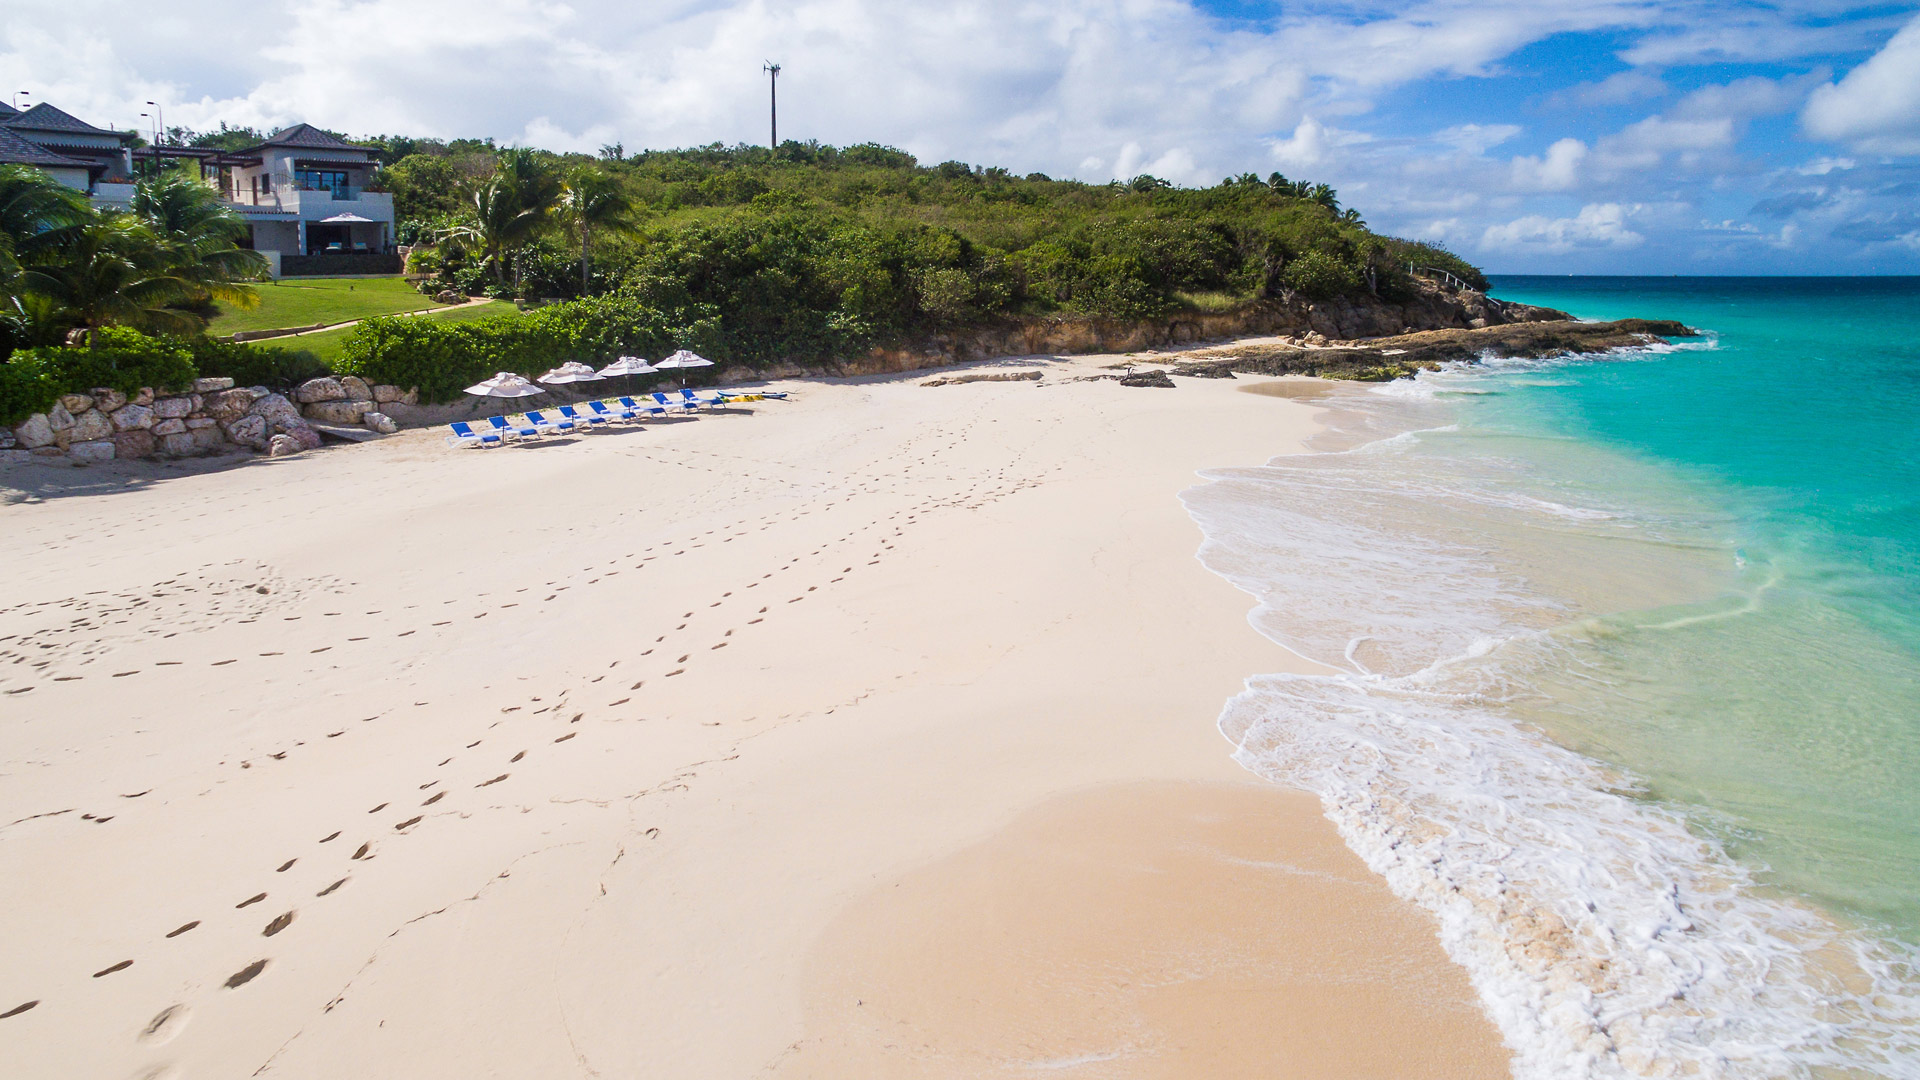 Long Bay is a secluded beach on the North West coast of Anguilla